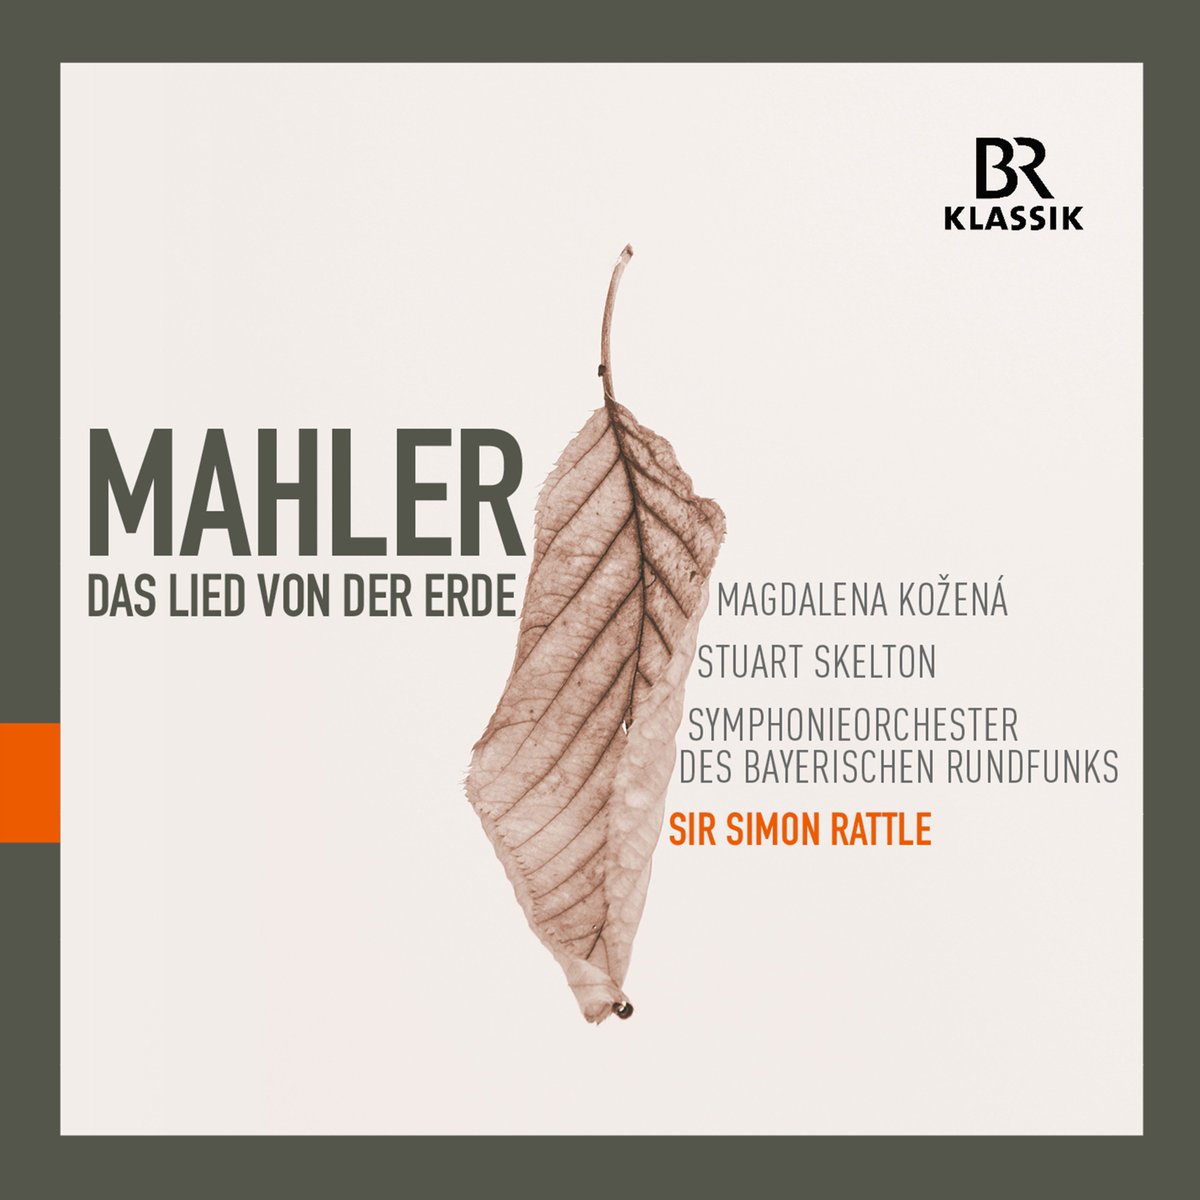 Check out the latest release from @BR_KLASSIK, featuring #Mahler's 'Das Lied von der Erde' with performances from @StuartSkelton, the @BRSO conducted by @SirSimonRattle, and more! Available now on @Spotify, @AppleMusic, @arkivmusic, and more: Naxos.lnk.to/DasLied